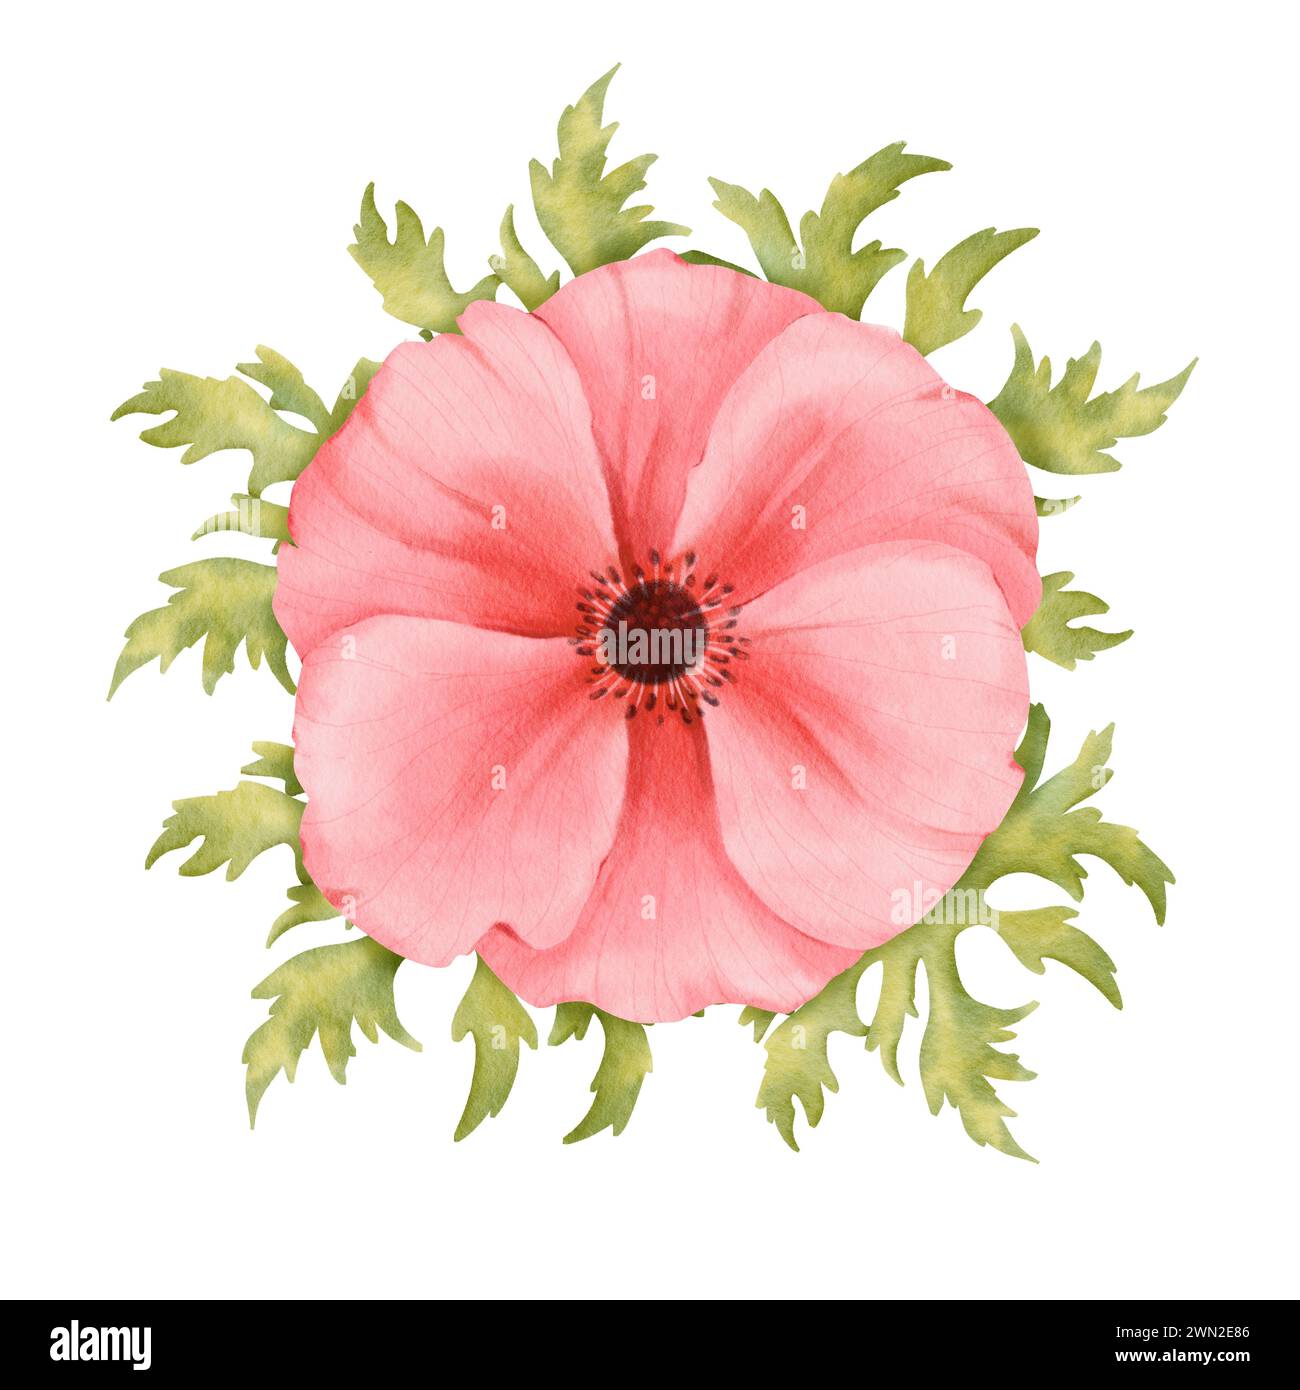 A watercolor composition featuring a pink anemone surrounded by fresh greenery. for use in wedding invitations, greeting cards, botanical prints Stock Photo